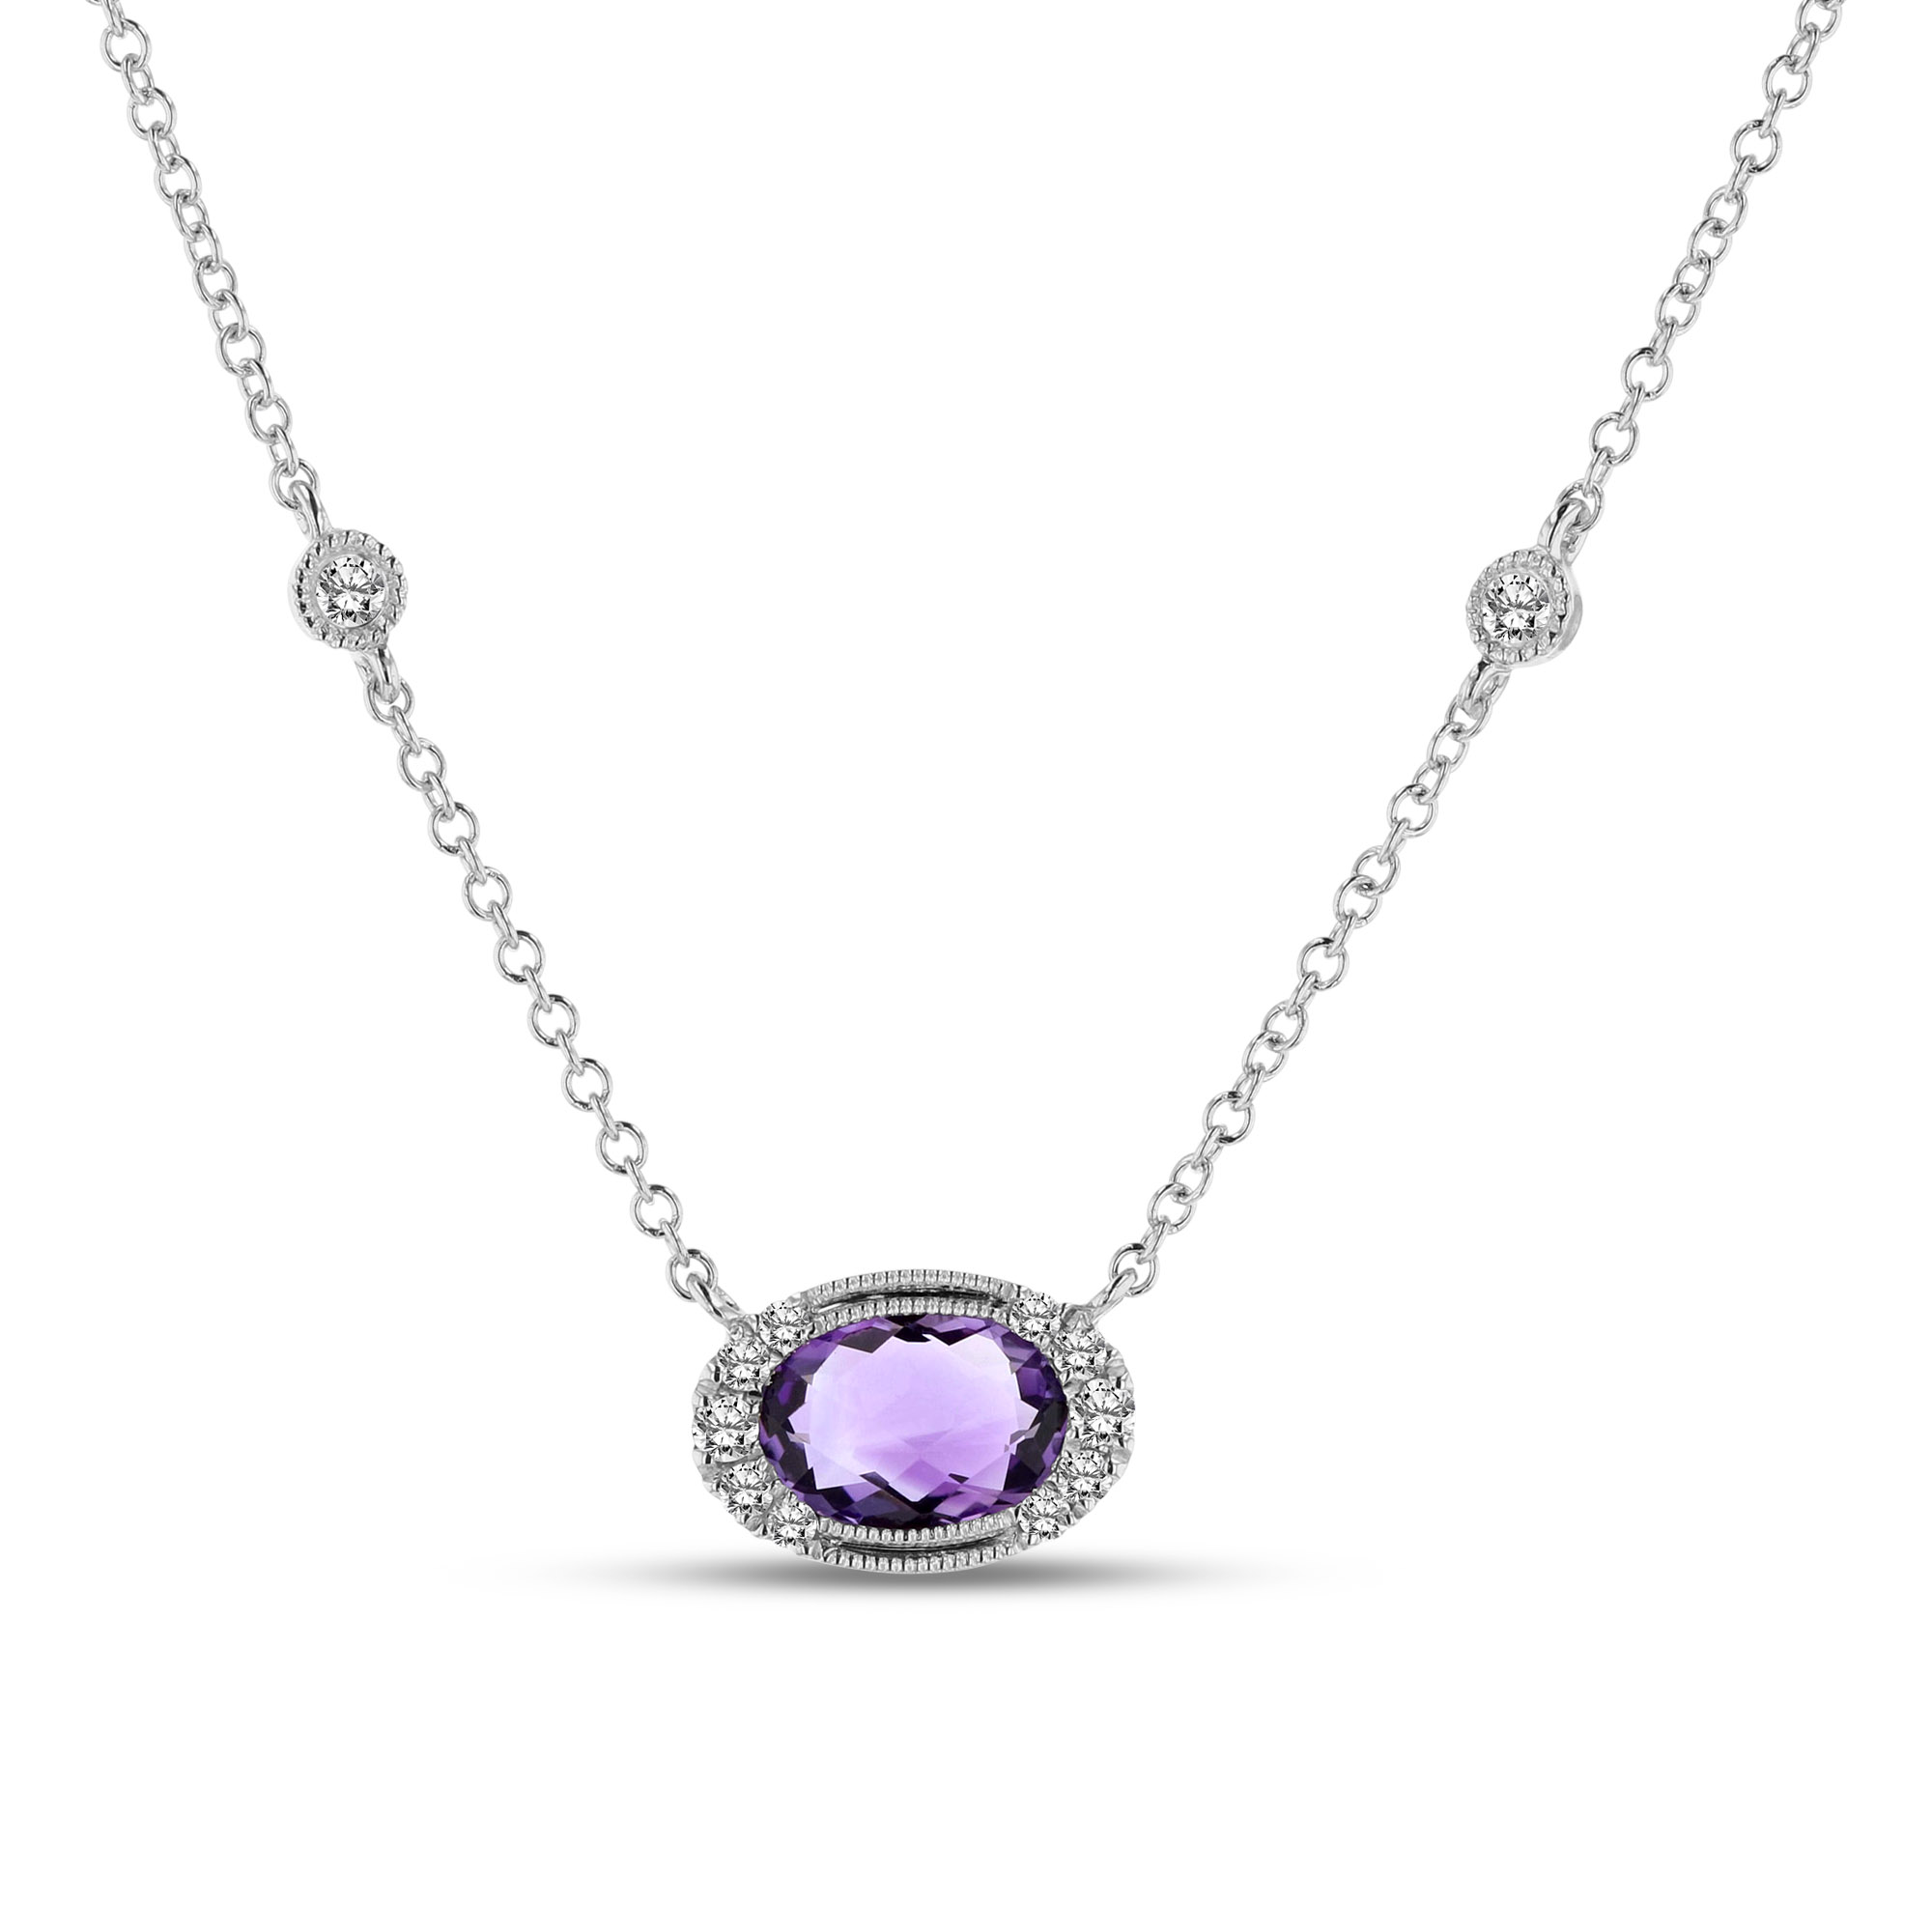 View 0.13ctw Diamond and Amethyst Pendant in 14k White Gold